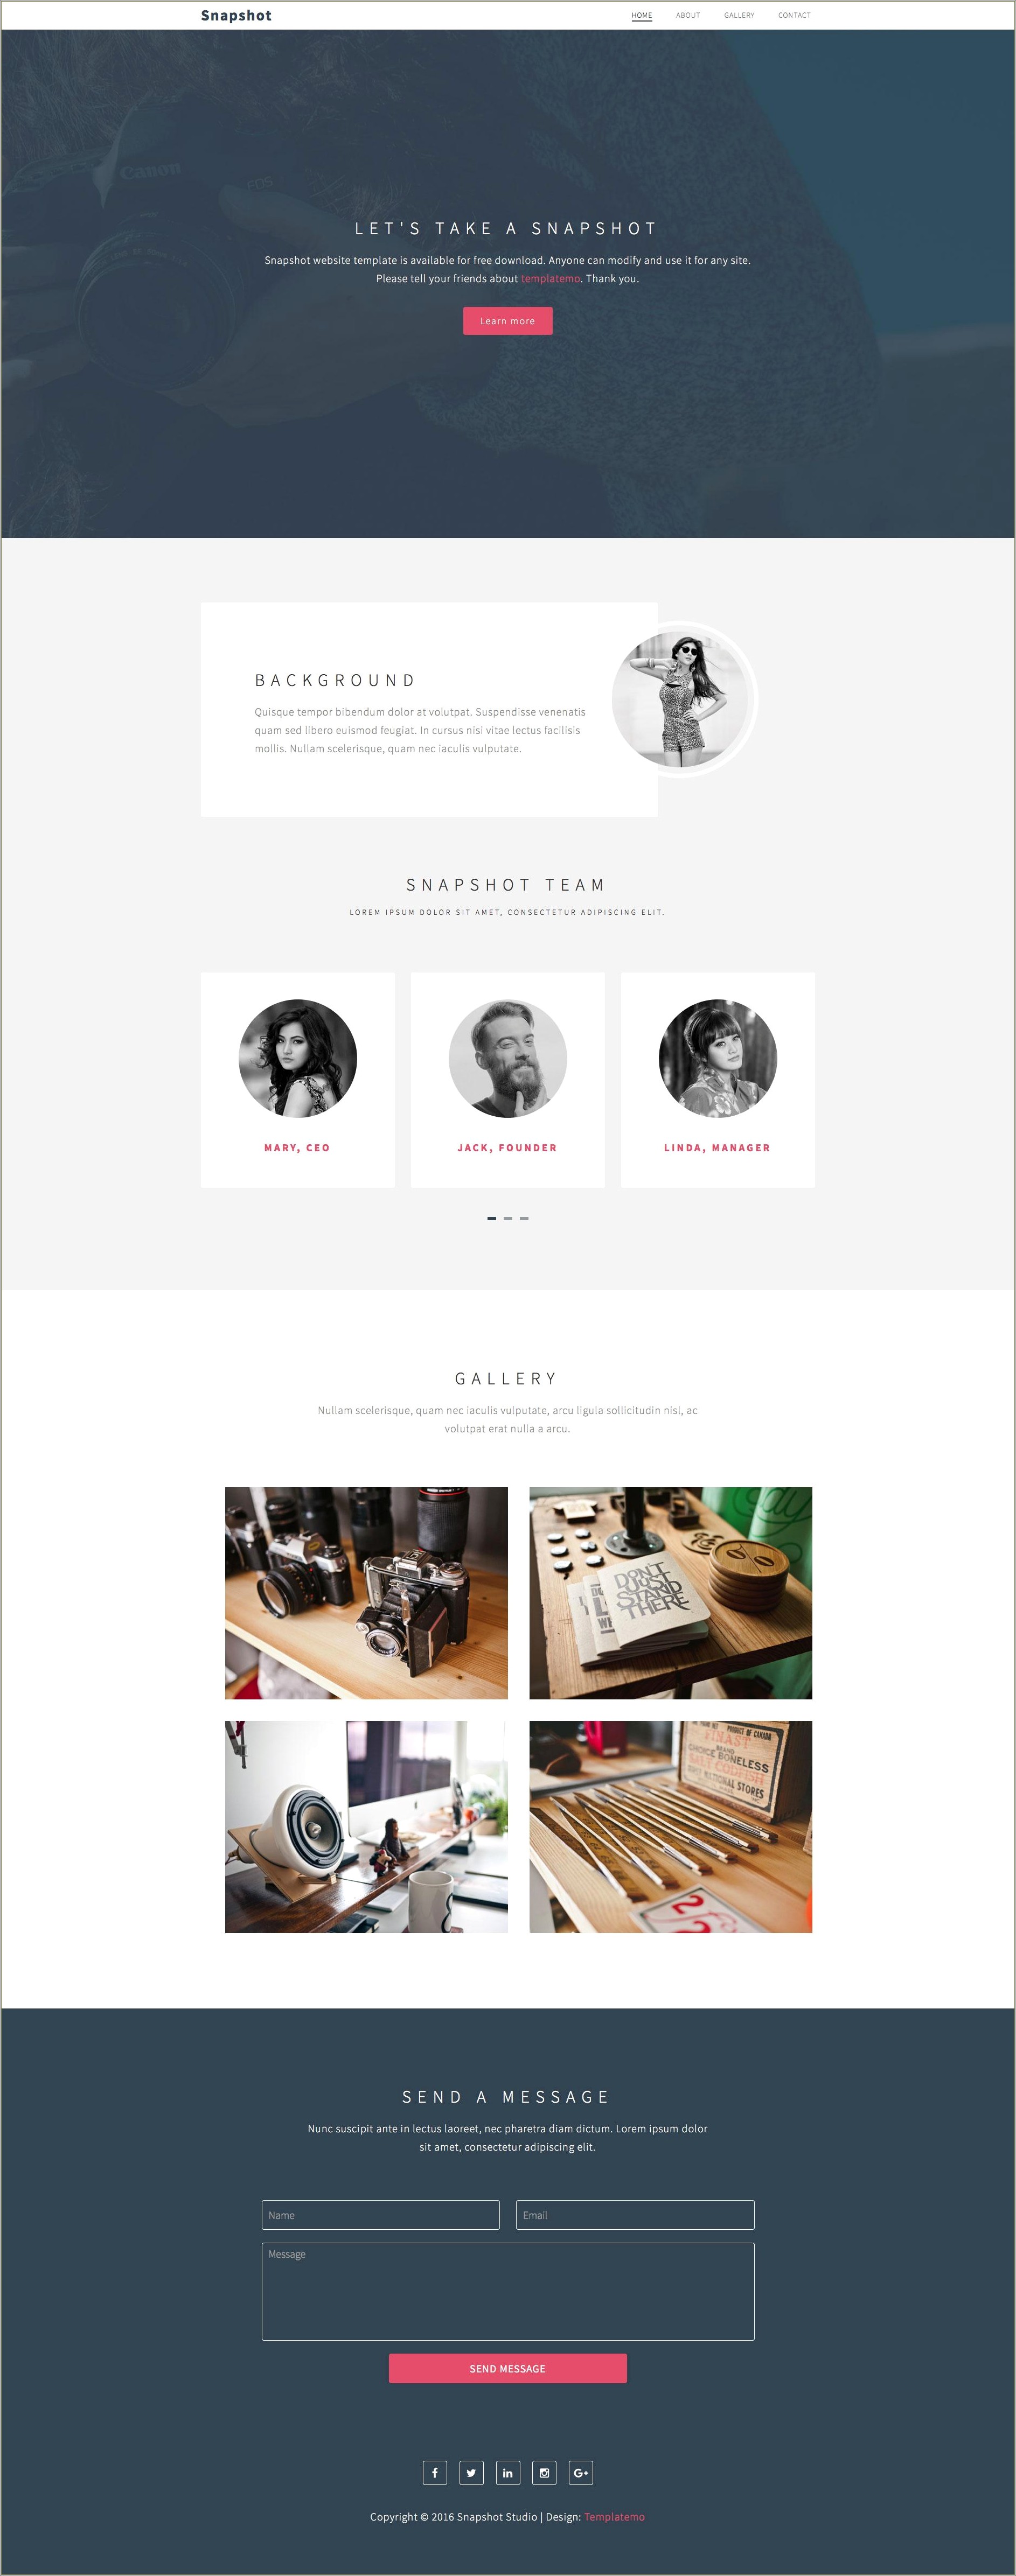 Free Bootstrap Html Landing Page Template